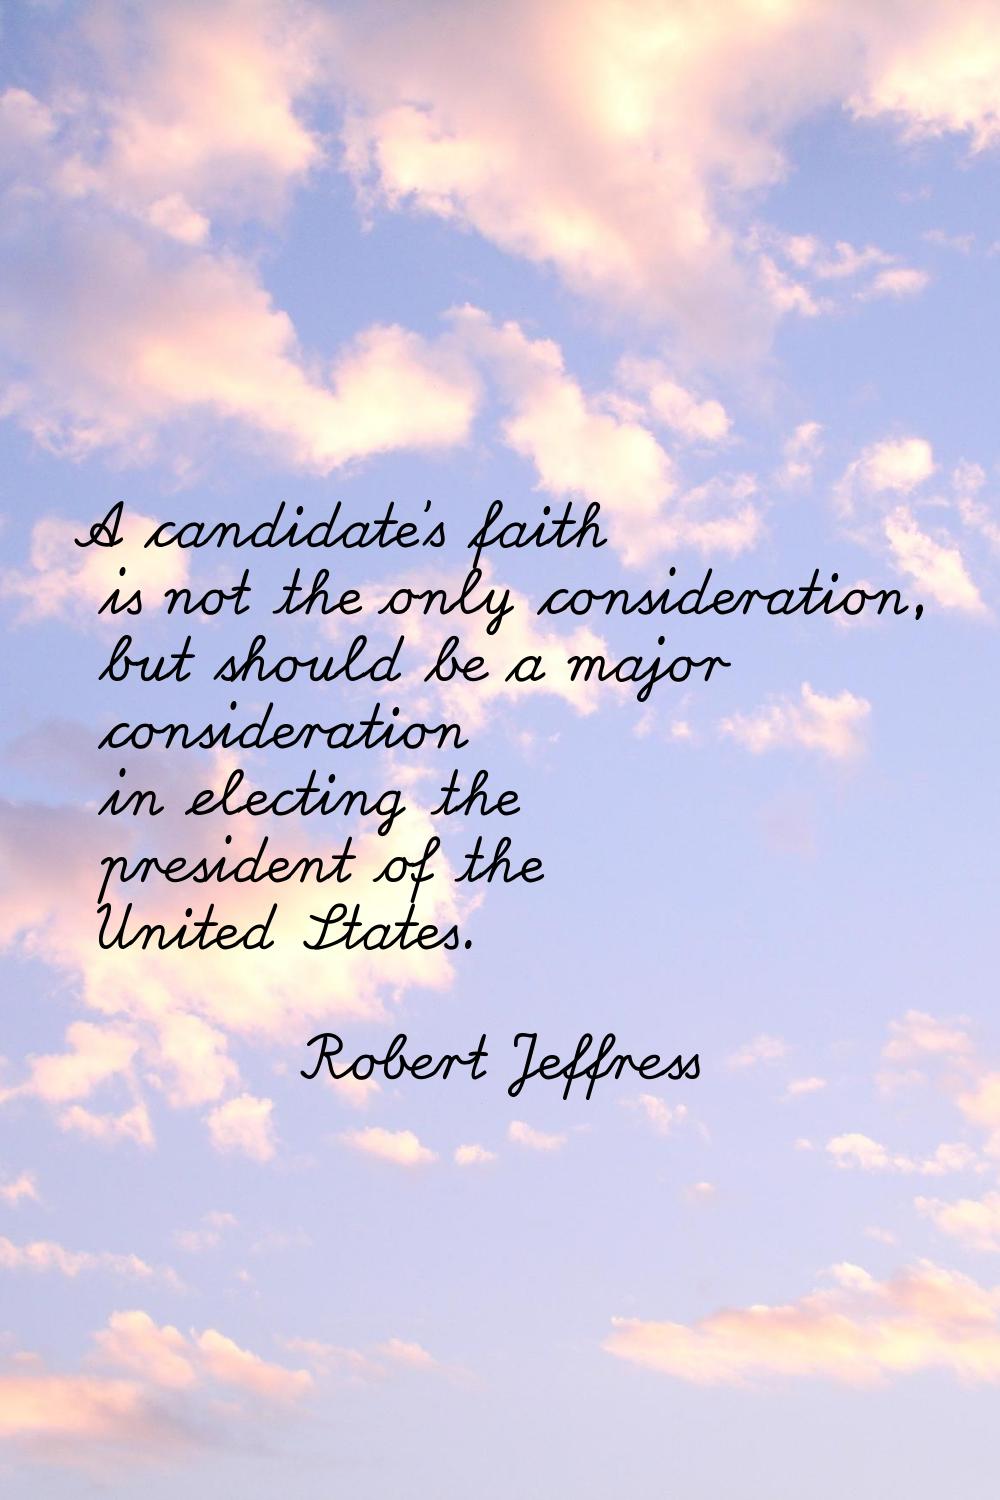 A candidate's faith is not the only consideration, but should be a major consideration in electing 